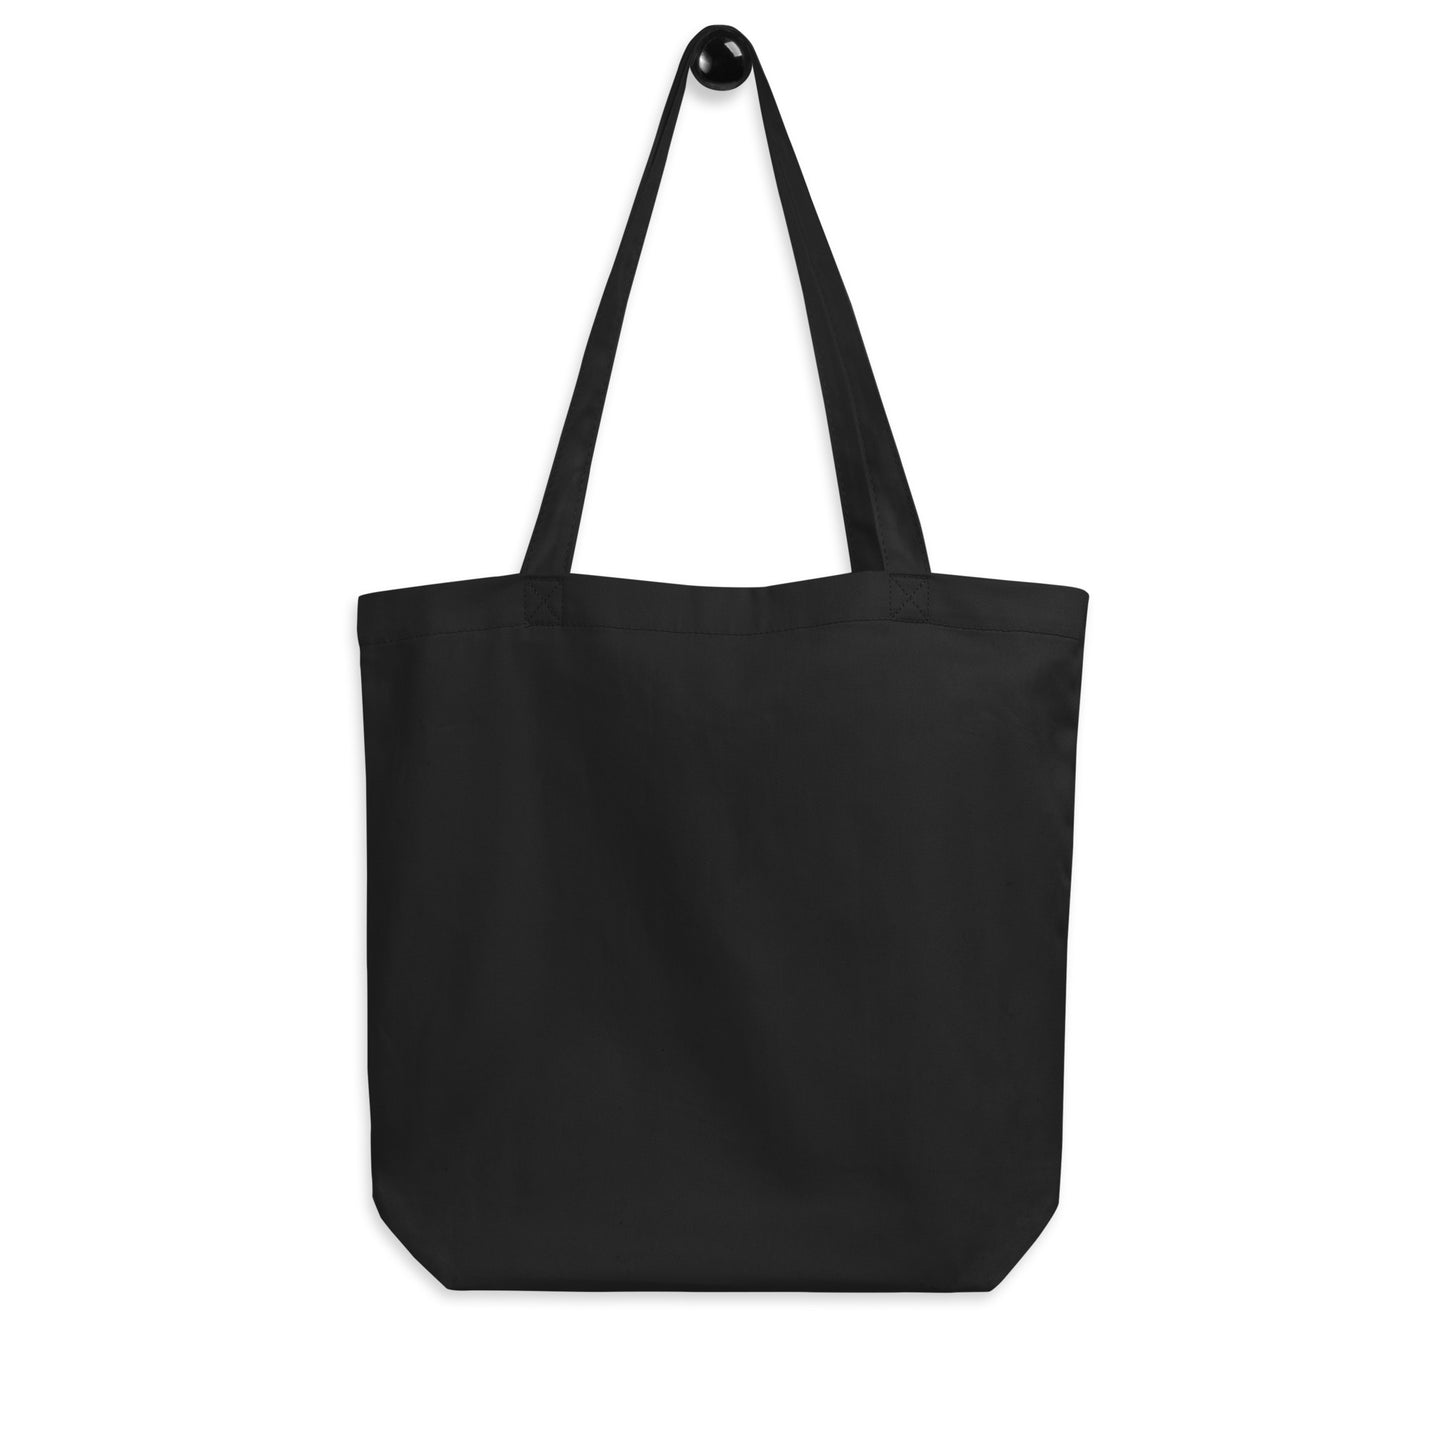 Unique Travel Gift Organic Tote - White Oval • ARN Stockholm • YHM Designs - Image 05